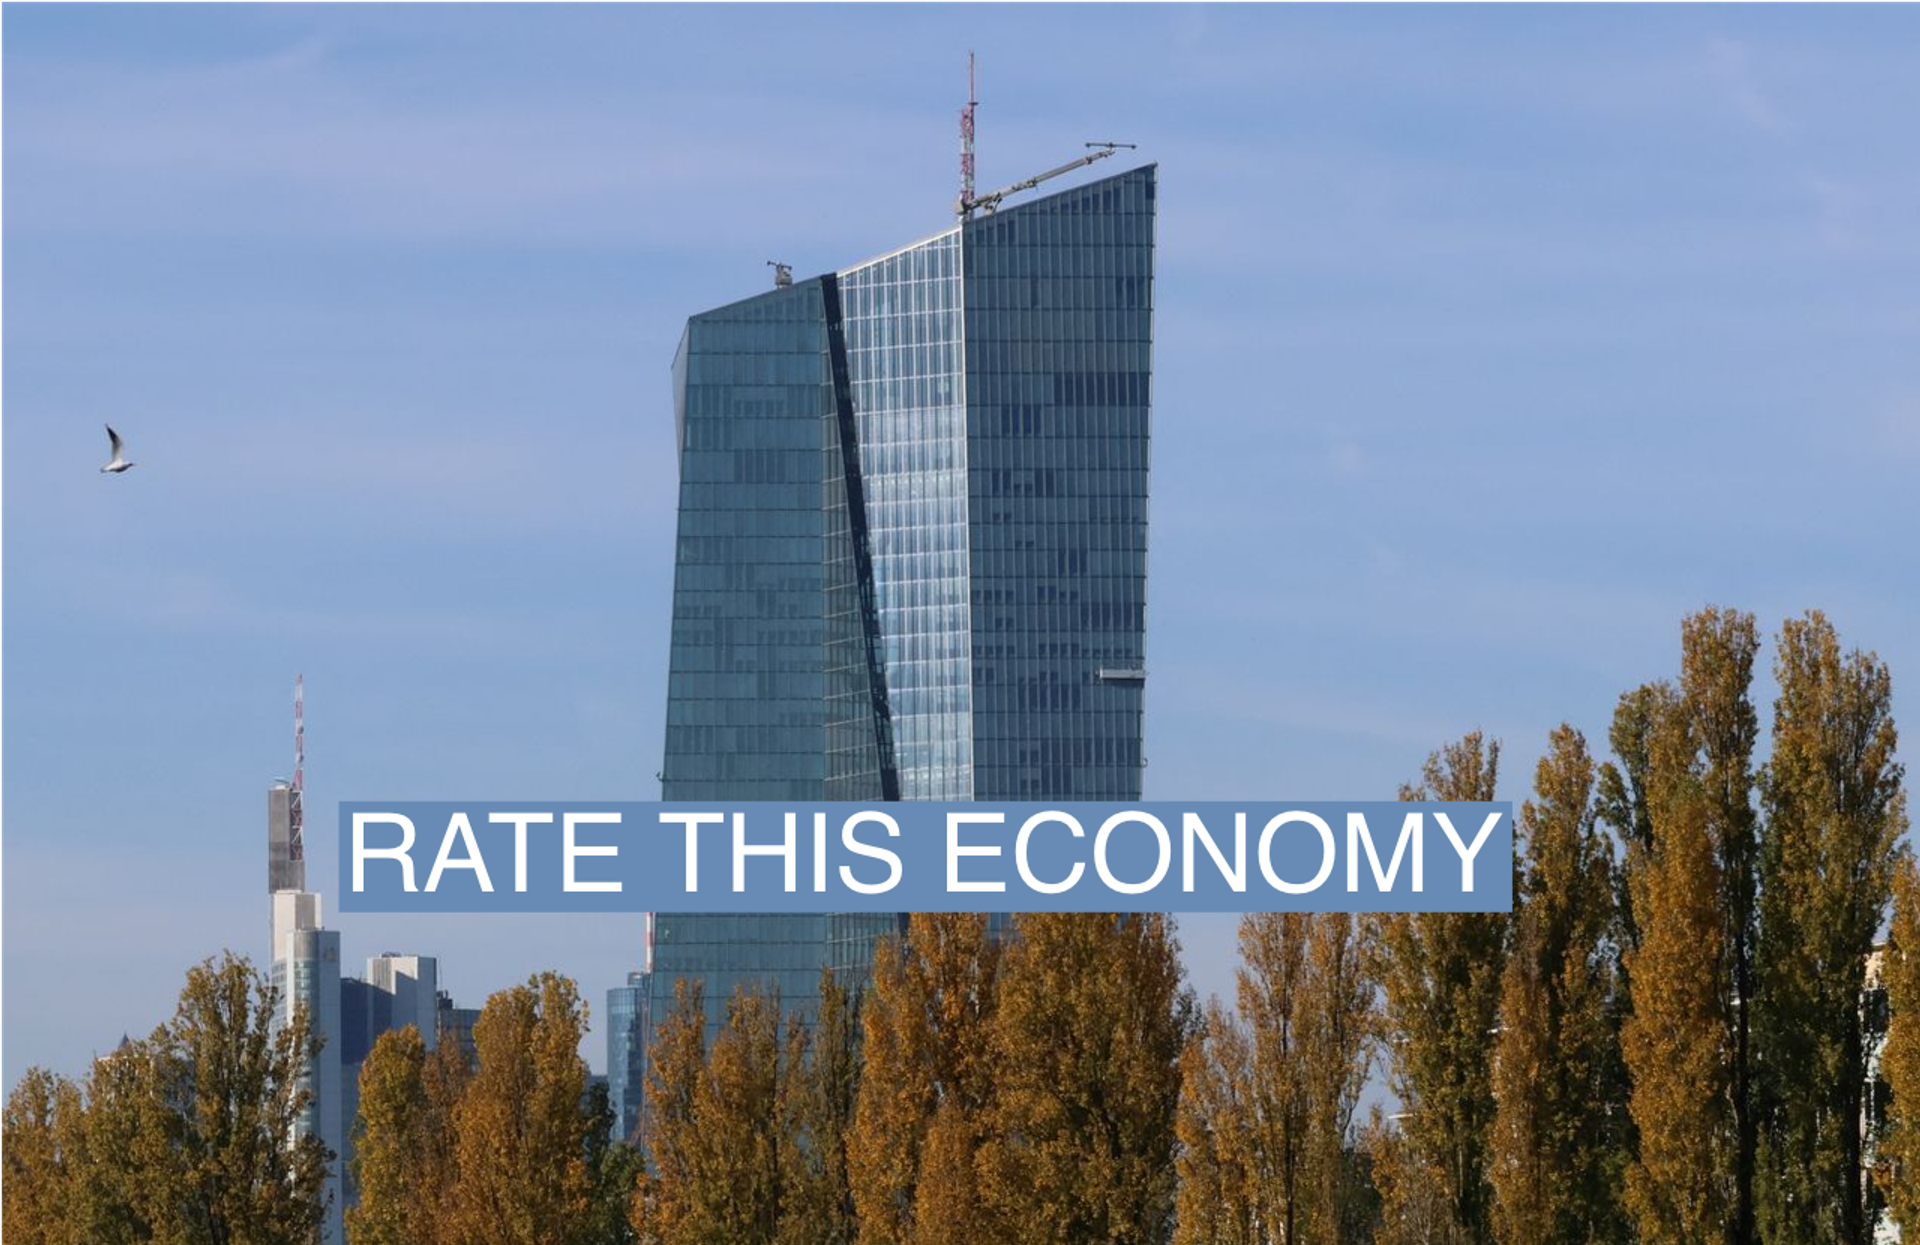 A view shows the European Central Bank (ECB) building, in Frankfurt, Germany October 27, 2022.